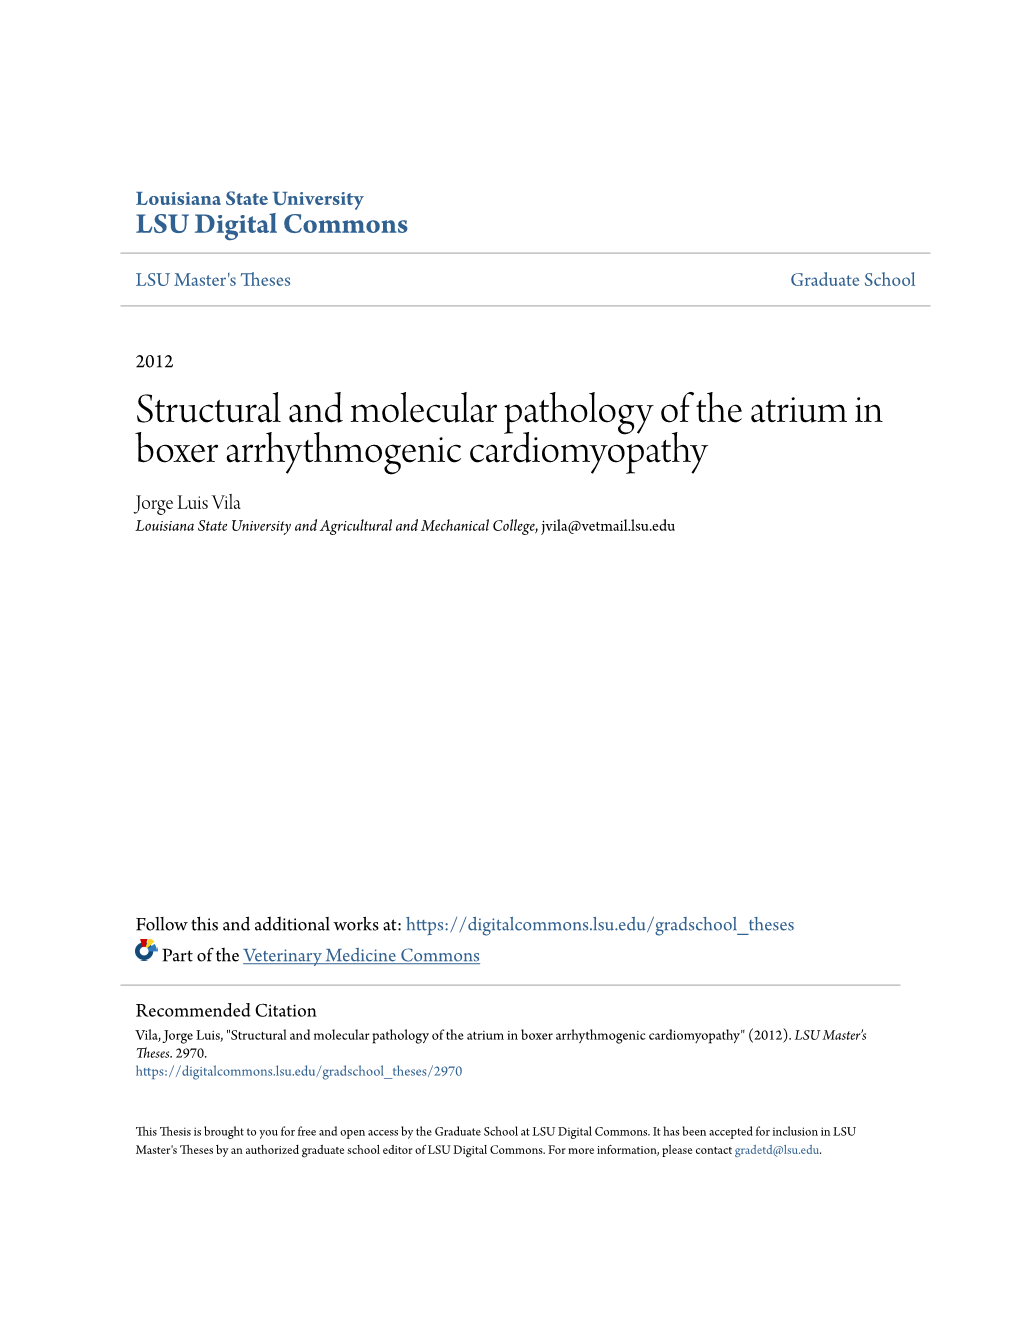 Structural and Molecular Pathology of the Atrium in Boxer Arrhythmogenic